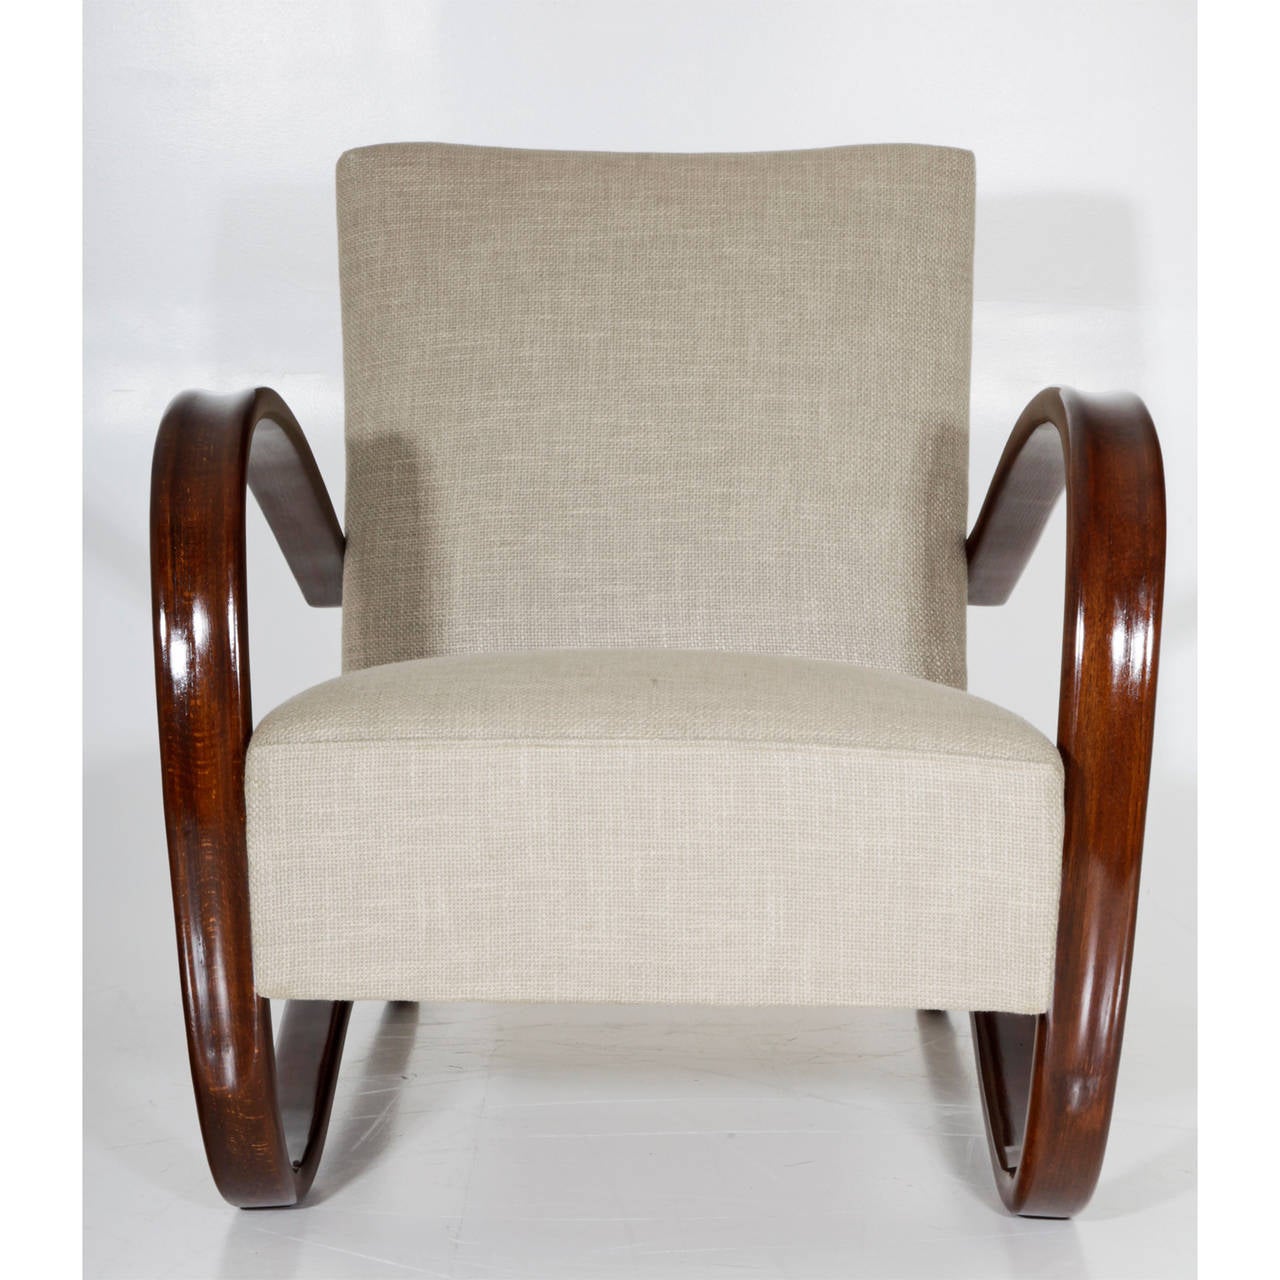 Czech Pair Armchairs by Jindrich Halabala from the 1930s